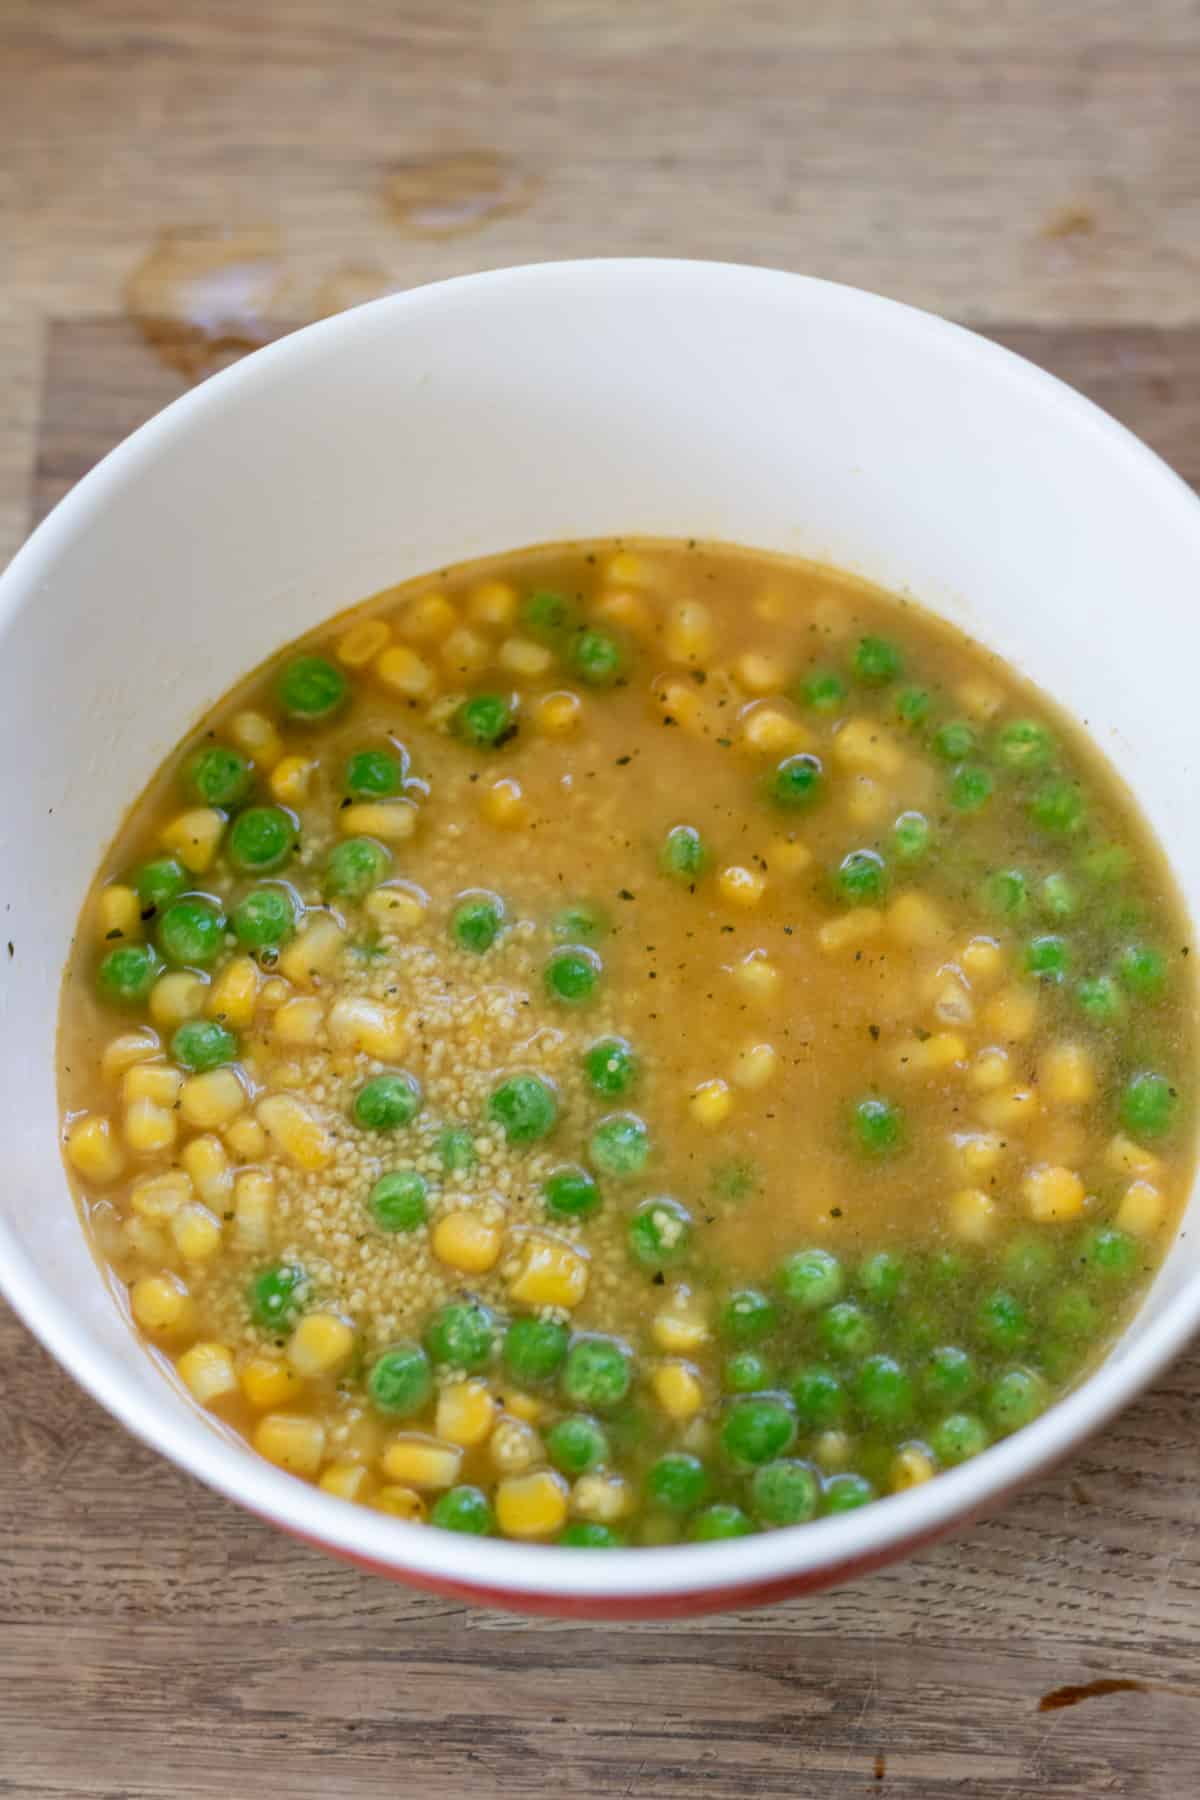 Couscous, frozen peas and corn and vegetable stock in a bowl.